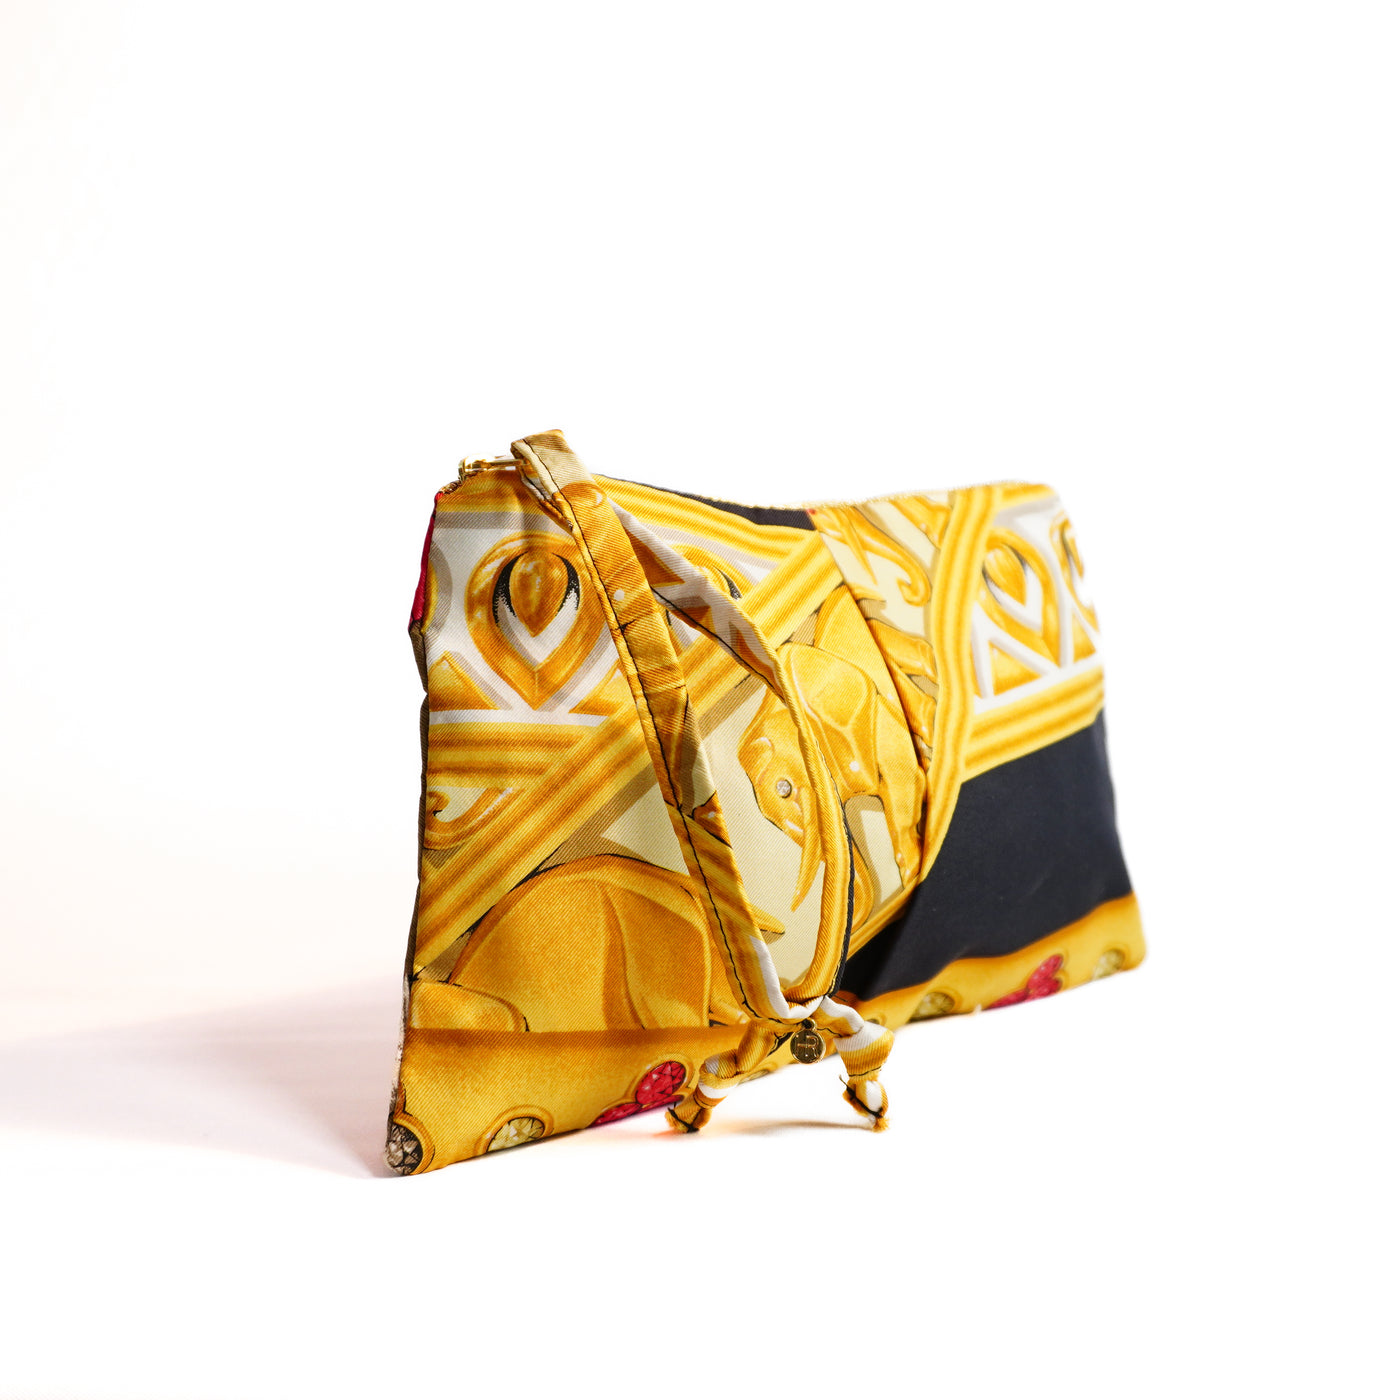 "Elephants" Scarf Bag (Upcycled from Cartier Scarf) Party Clutch Hampton Road Designs   